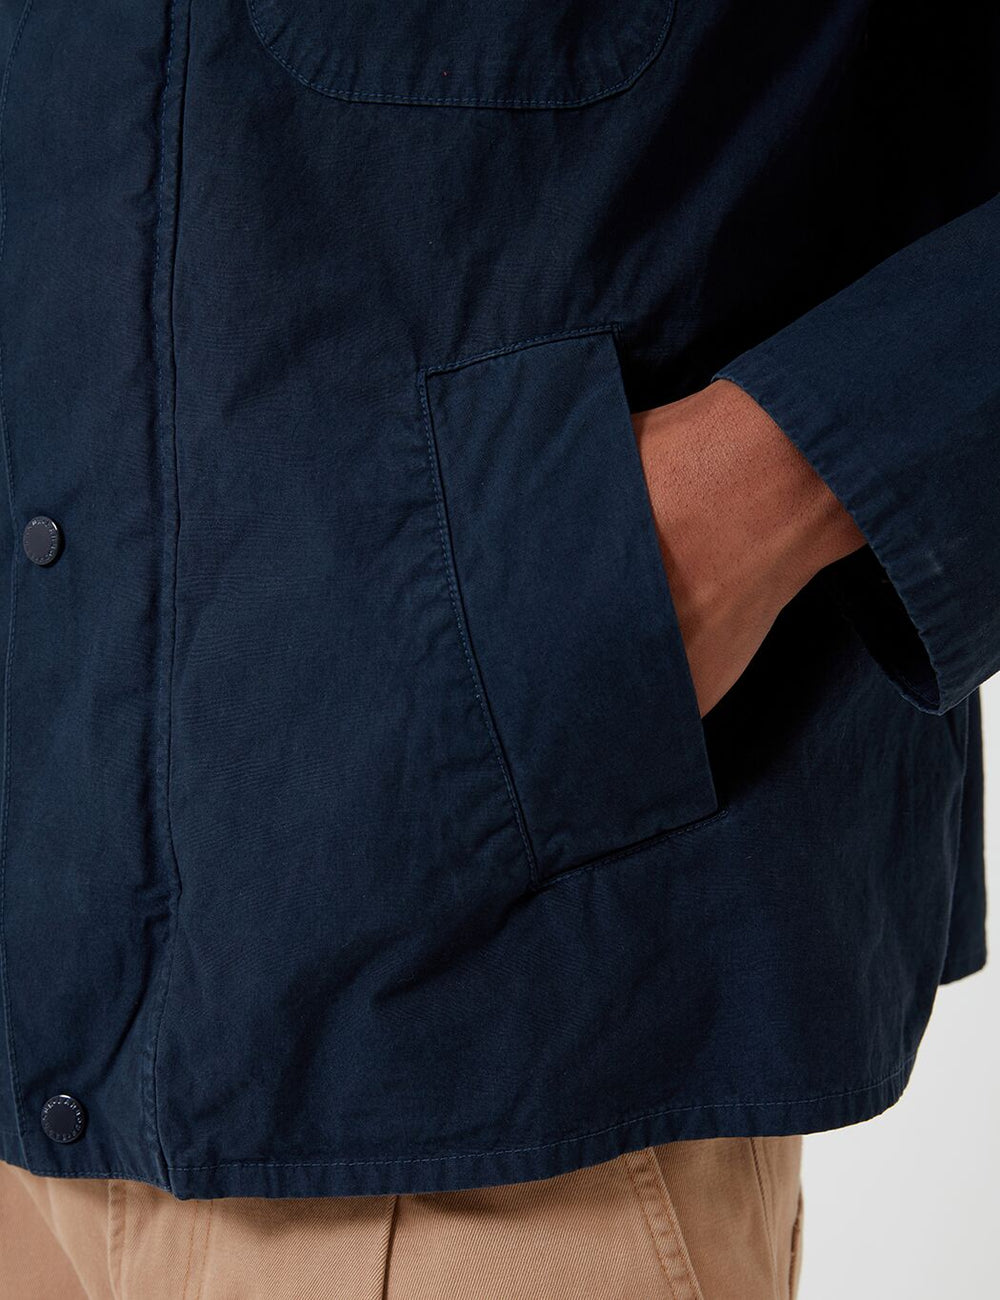 Barbour x EG Cowen Washed Casual Jacket - Navy | URBAN EXCESS